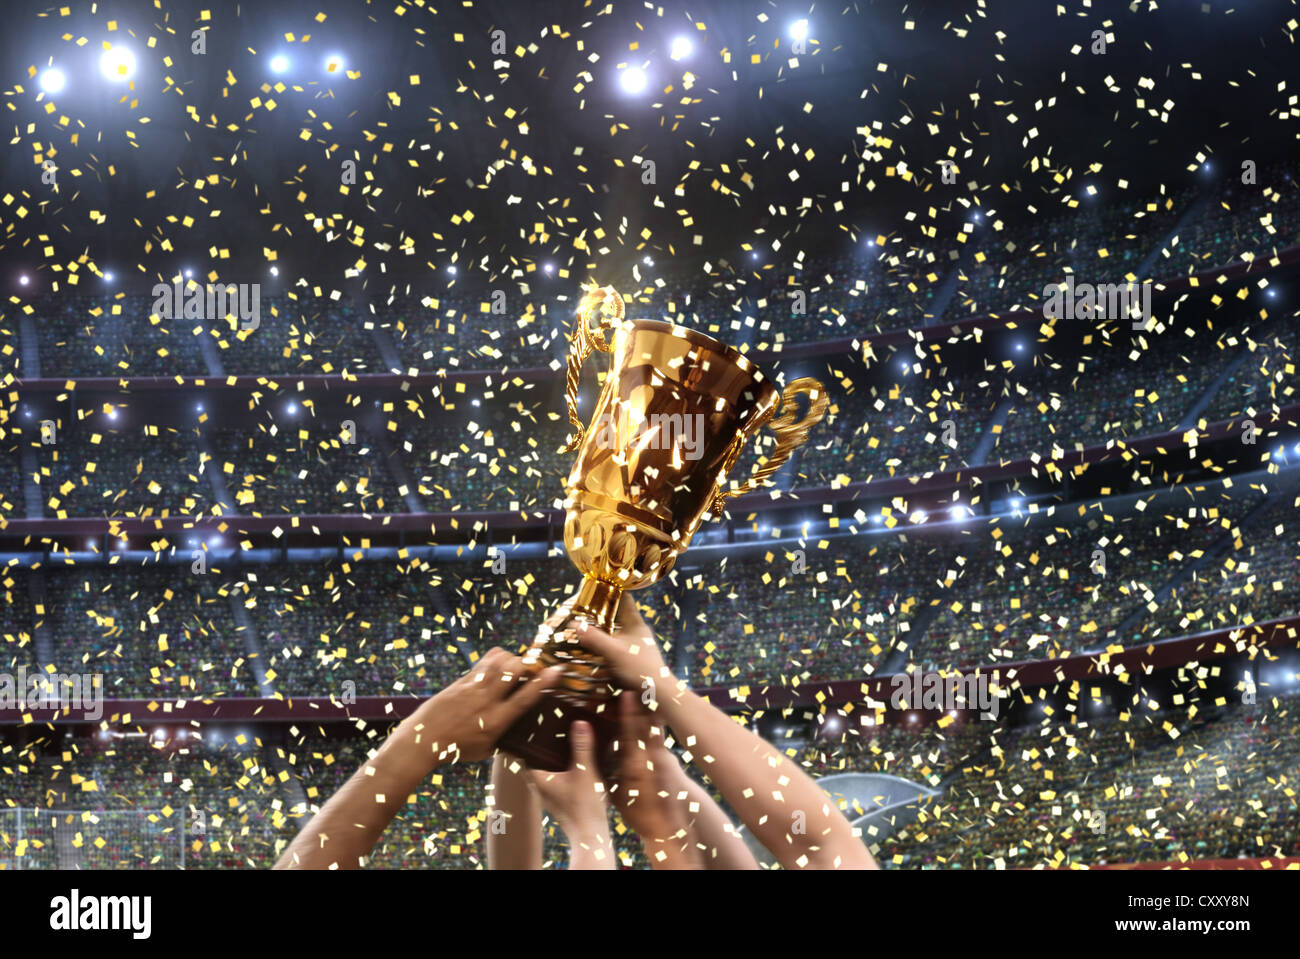 Trophy, football stadium, cheering, arms, confetti, stands Stock Photo